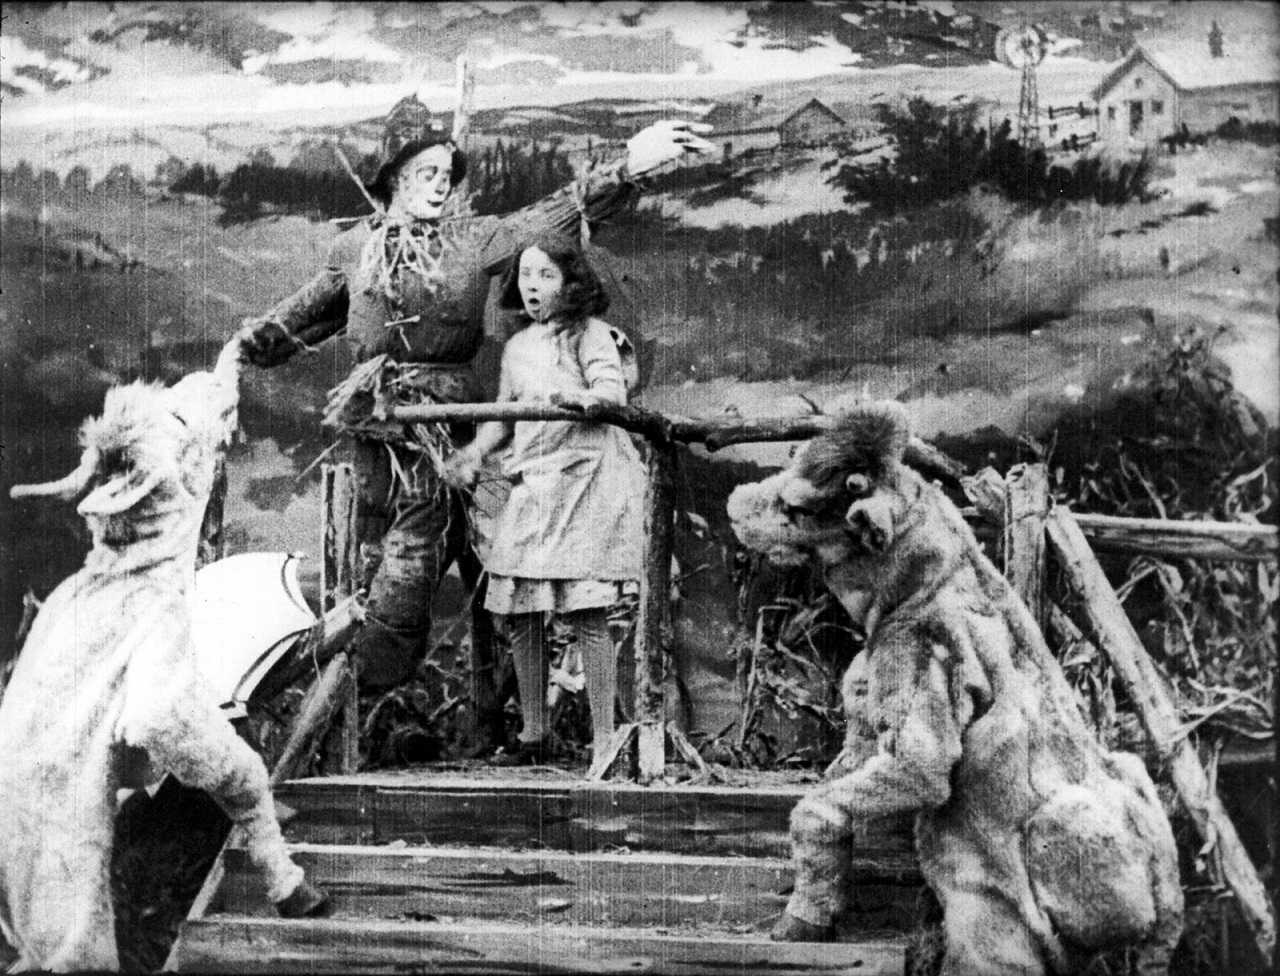 Imogene the Cow, The Scarecrow (Robert Z. Leonard), Dorothy (Bebe Daniels) and The Cowardly Lion in The Wizard of Oz (1910)